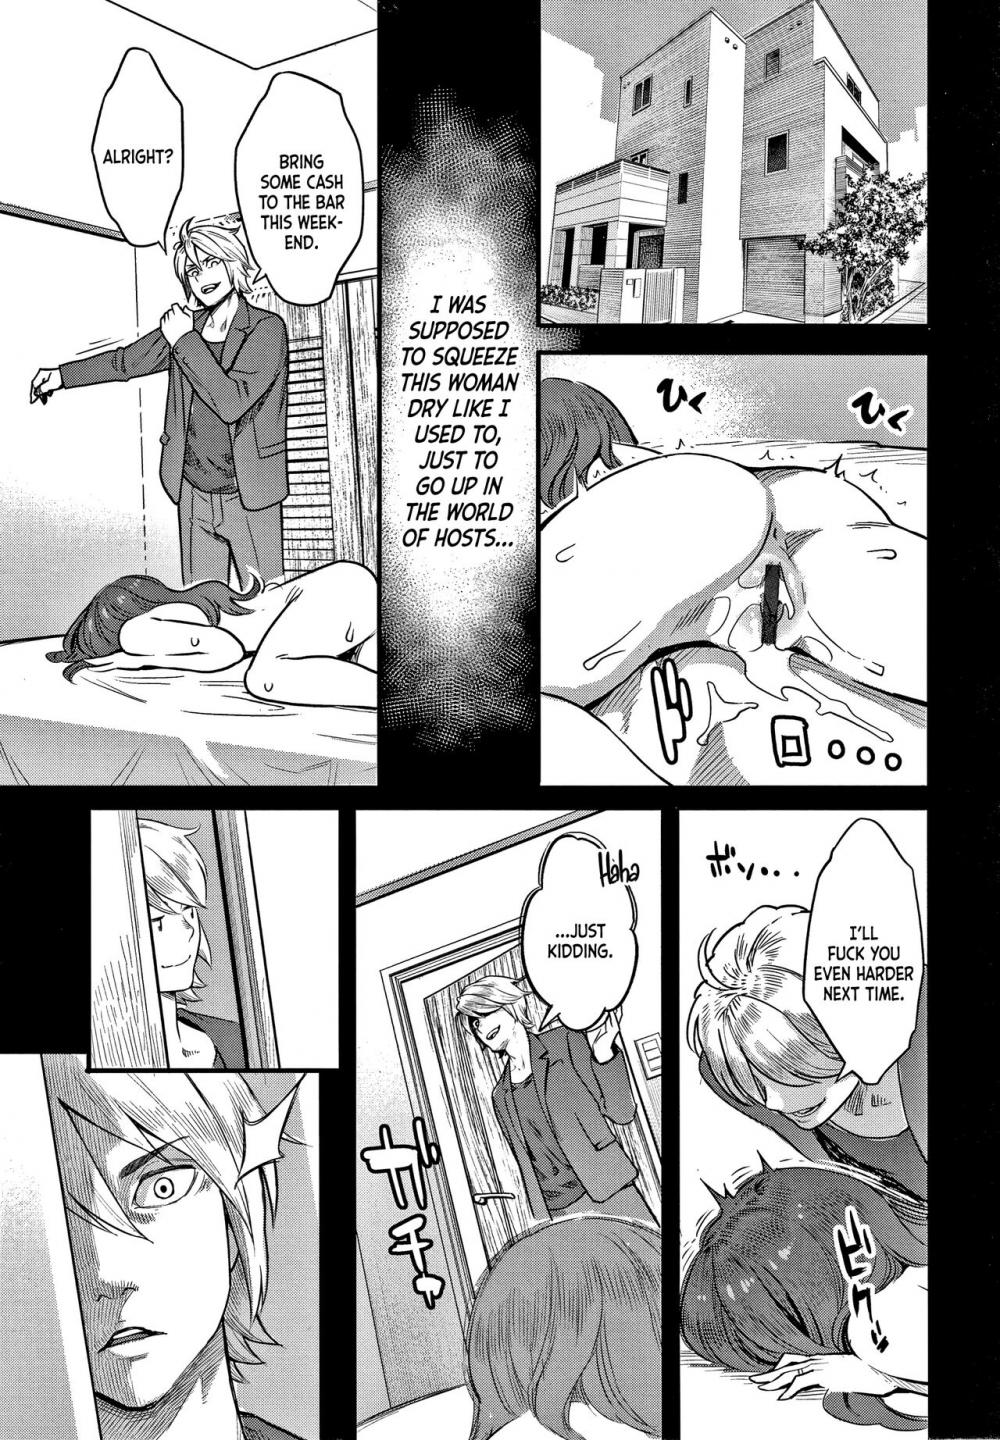 Hentai Manga Comic-Contract of Submission-Chapter 2-3